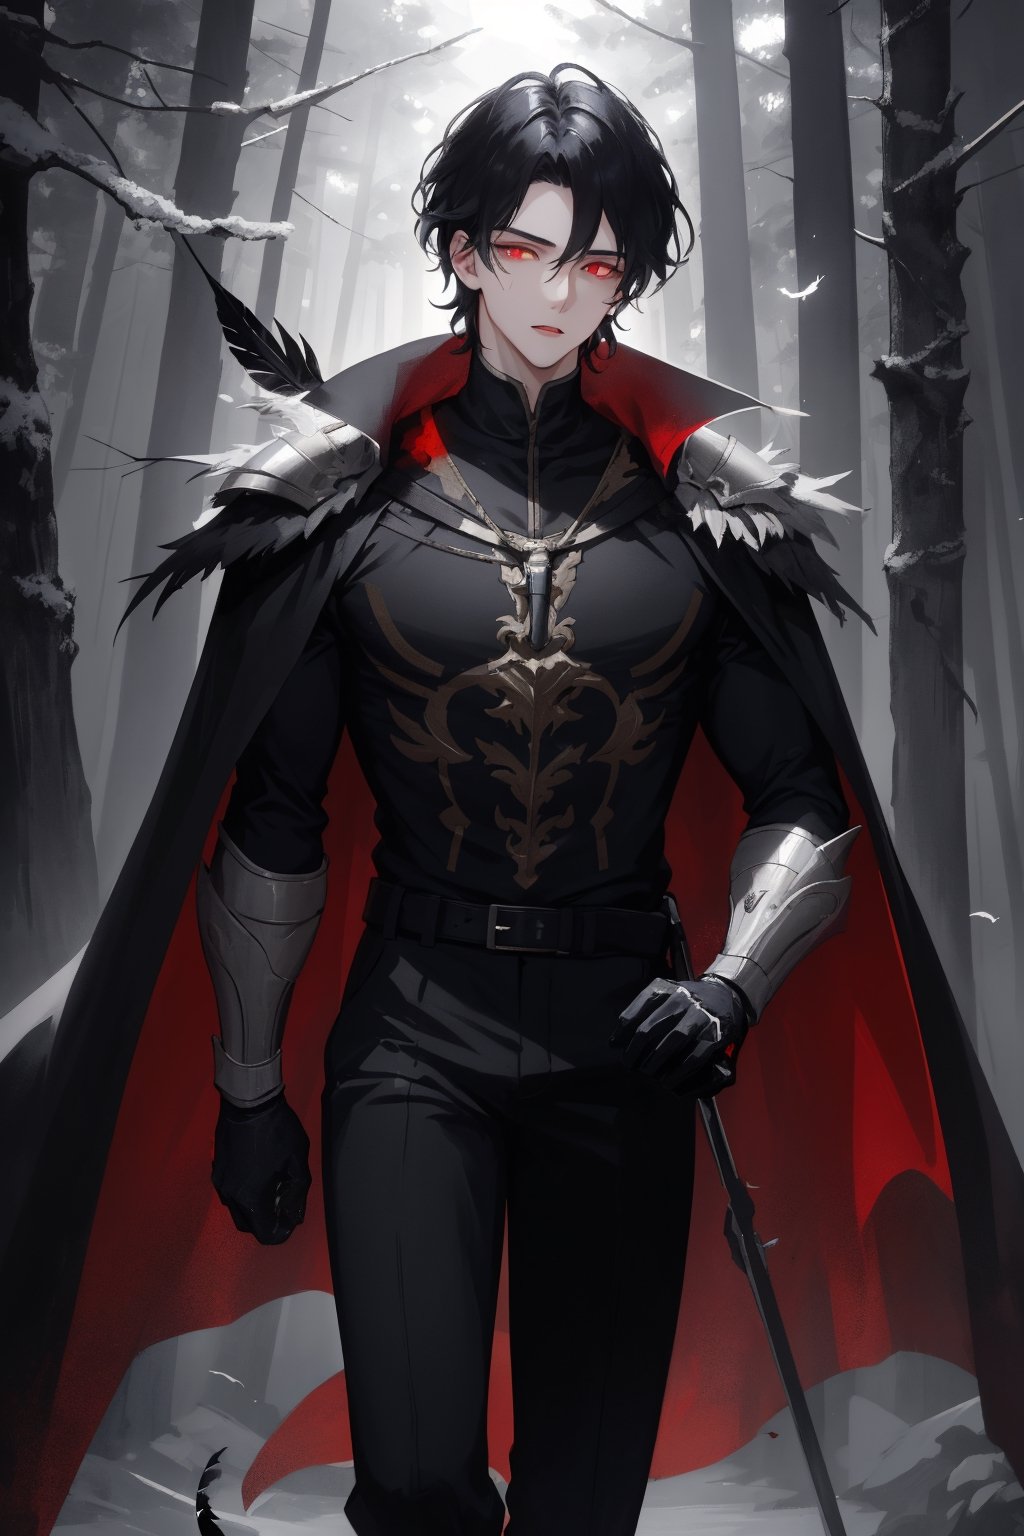 1man, young man,  25 years old,  short black hair,wavy hair,  glowing  red eyes, pale skin,  walking in a magical forest,  magical forest background,  day,  day light, wearing a hunter armor,black feathers cape,  training,  challenger face,  fitness body,  piece teacher,  perfect face,  high quality,  American shot,  perfect face,  perfect hands,  muscular sensual body,  aesthetic and sensual body, Detailedface,1boy,wrenchftmfshn